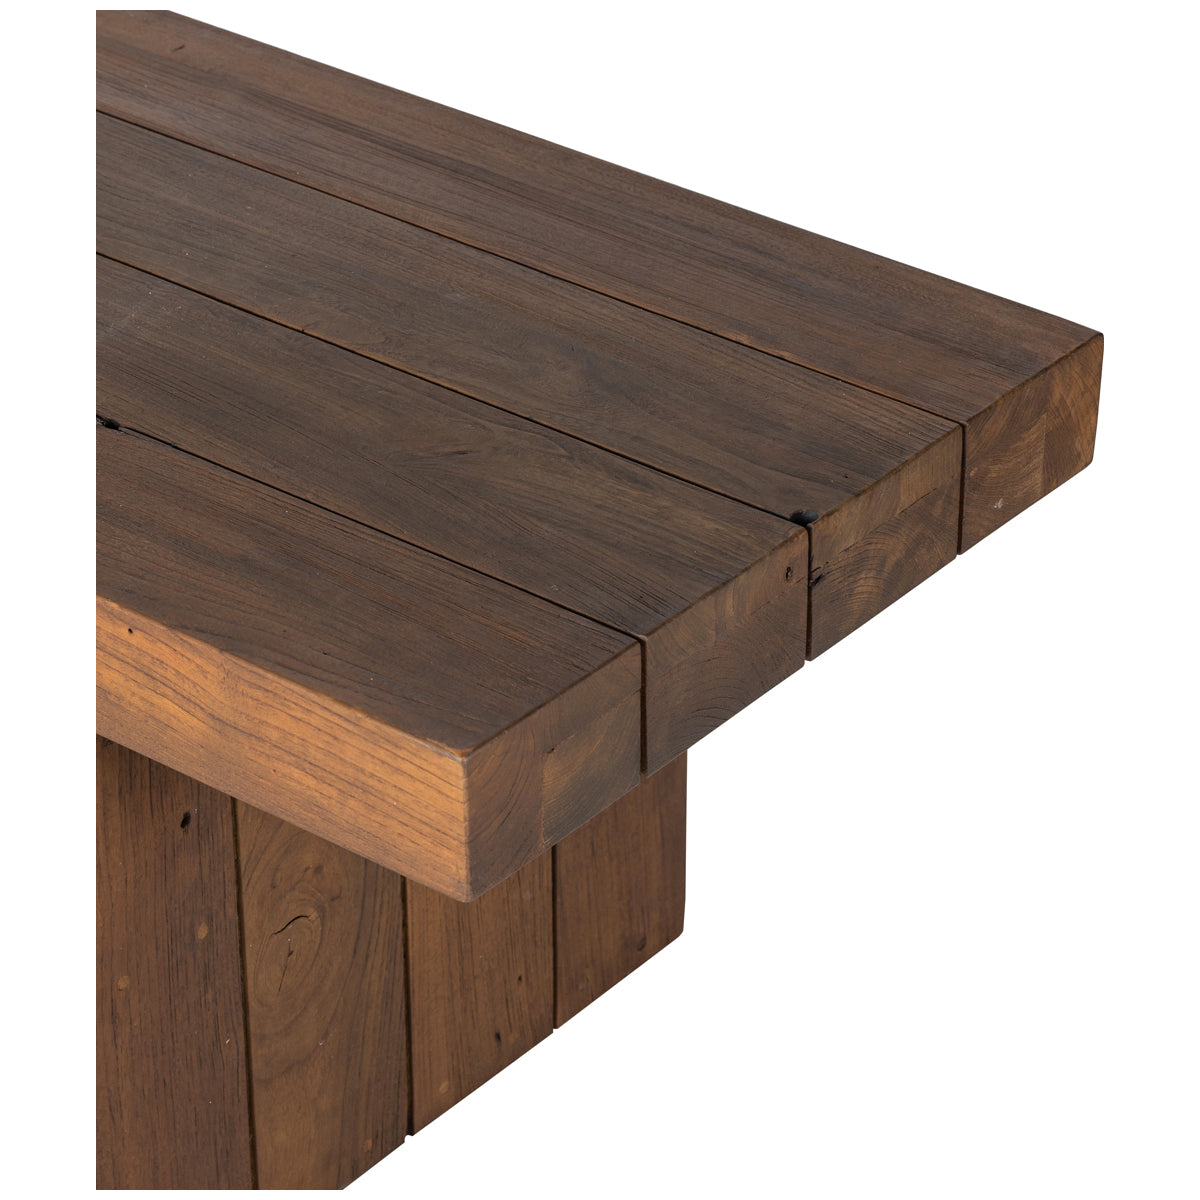 Four Hands Duvall Encino Outdoor Dining Bench